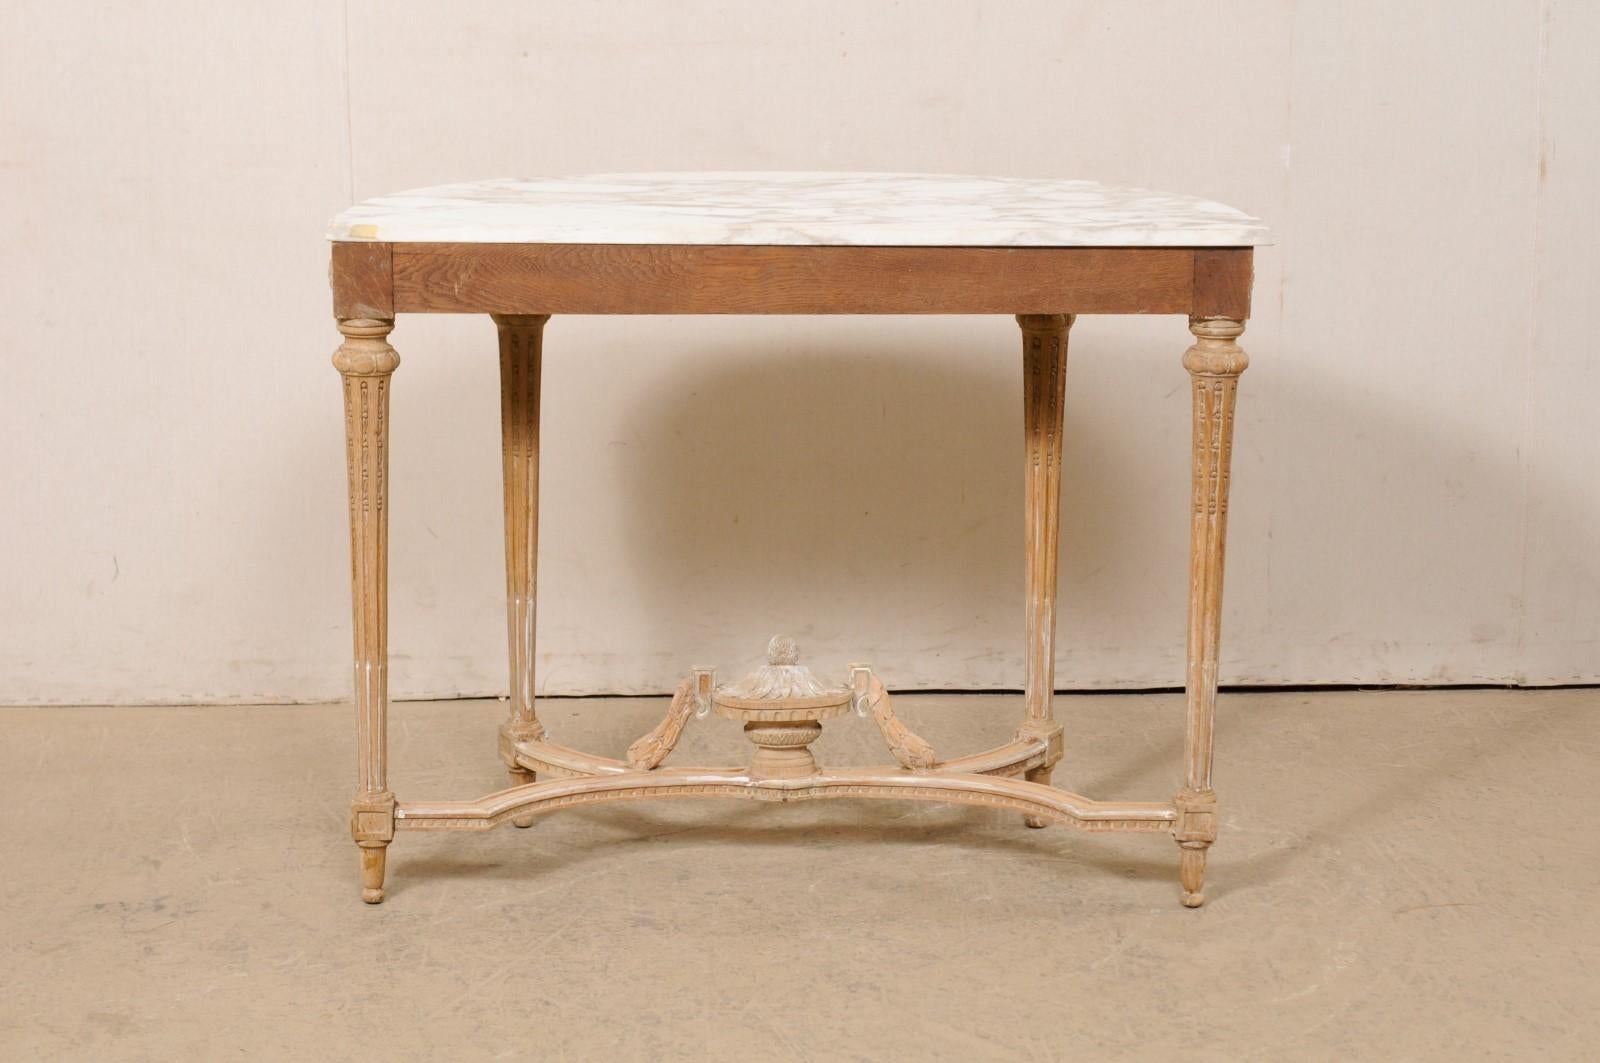 French Neoclassic Style Marble-Top Console Table W/Nice Urn Finial at Underside For Sale 3